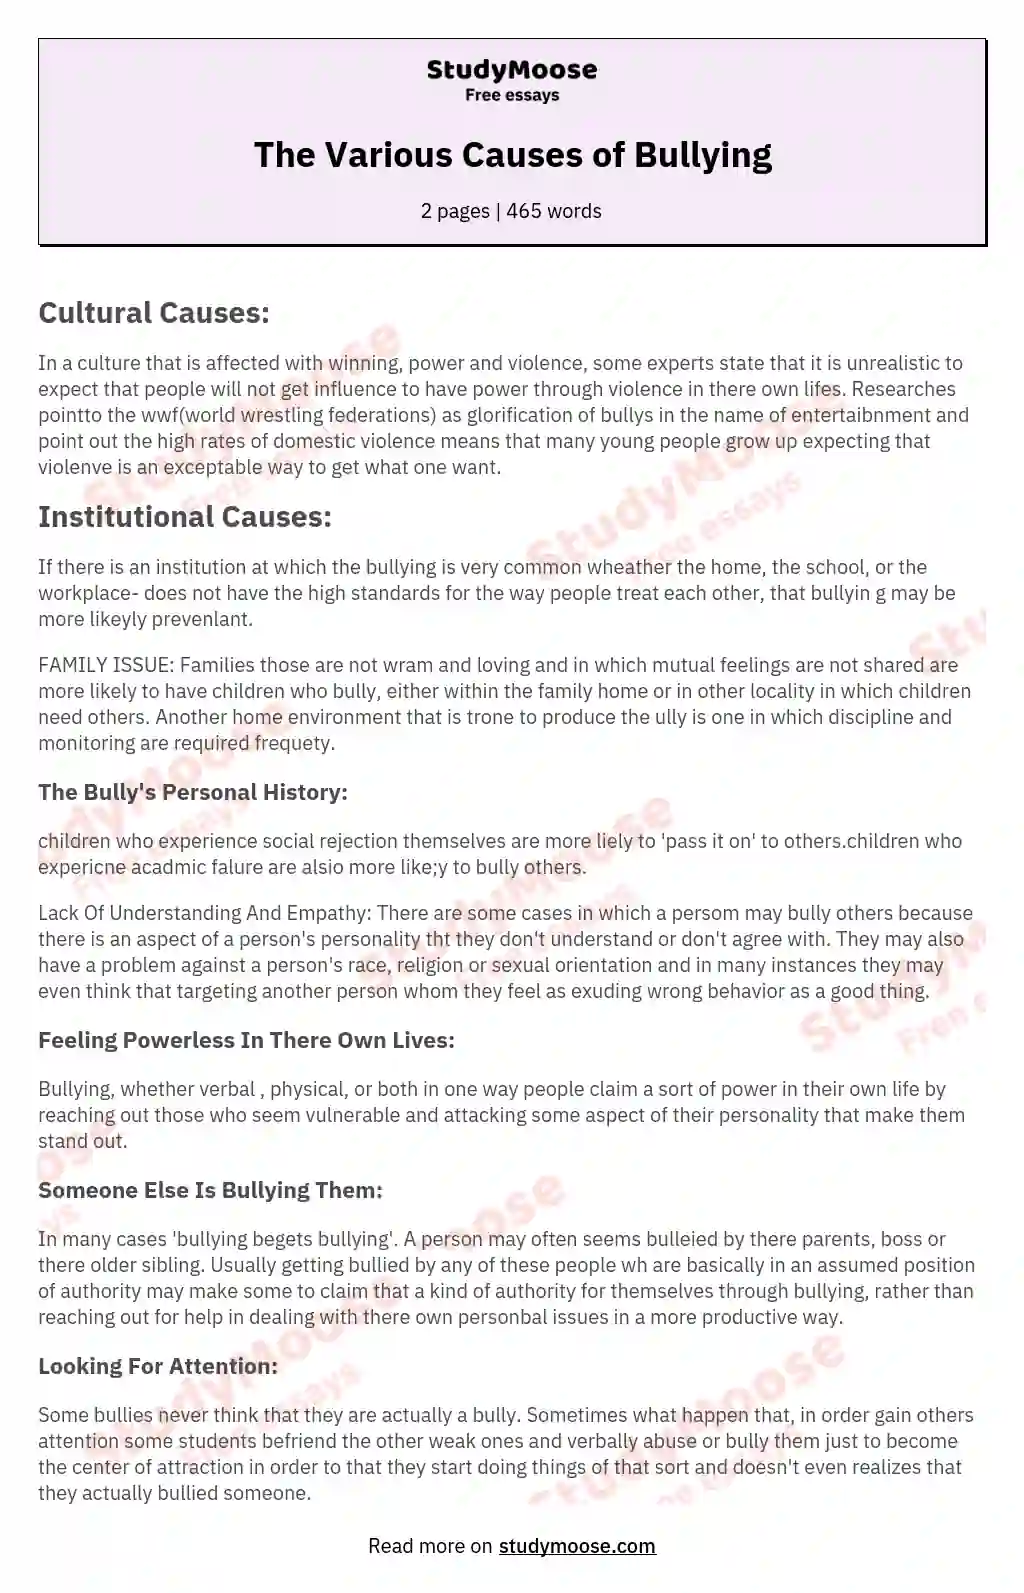 The Various Causes of Bullying essay